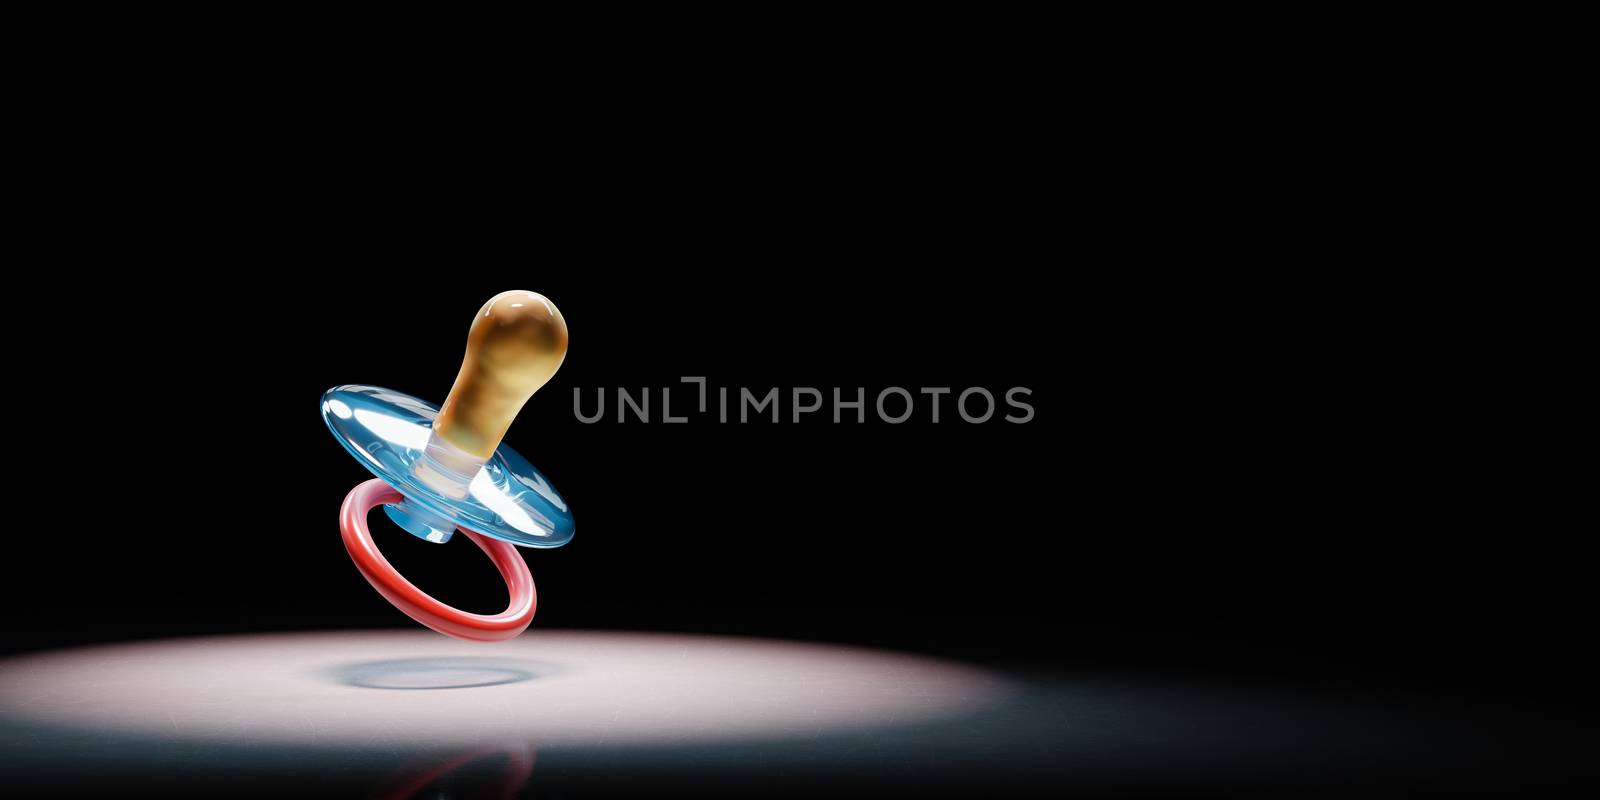 Baby's Pacifier Spotlighted on Black Background by make